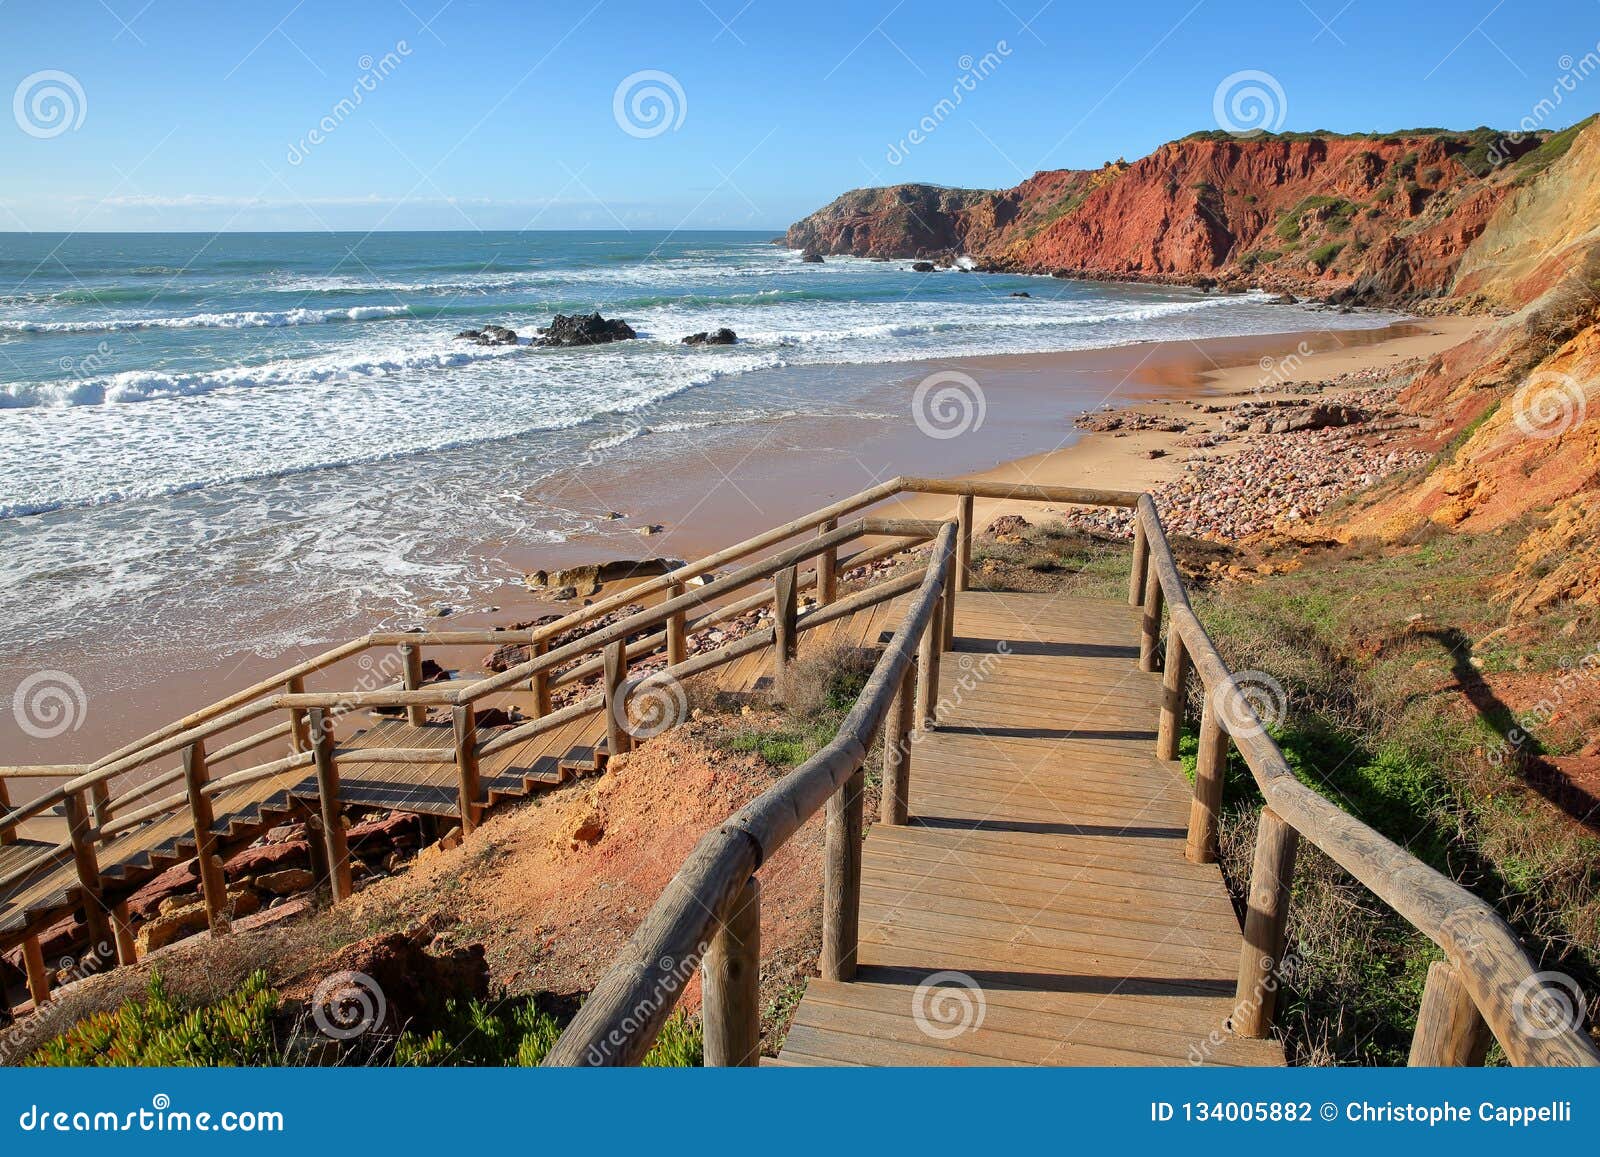 amado beach near carrapateira, with colorful landscape and dramatic cliffs, costa vicentina, algarve